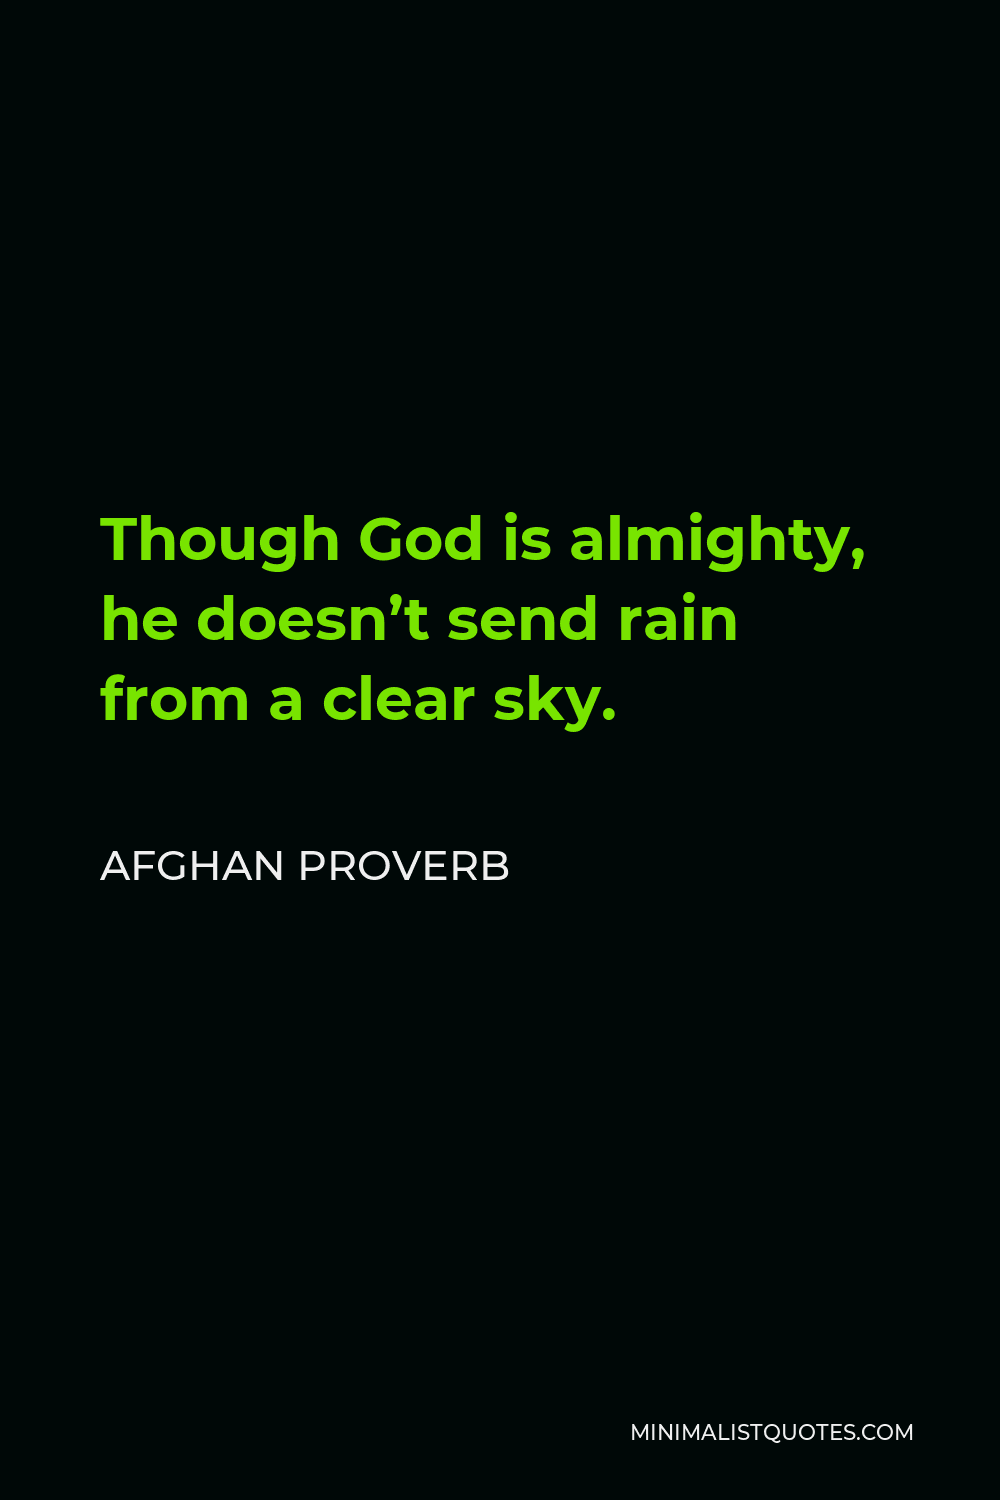 Afghan Proverb Quote - Though God is almighty, he doesn’t send rain from a clear sky.